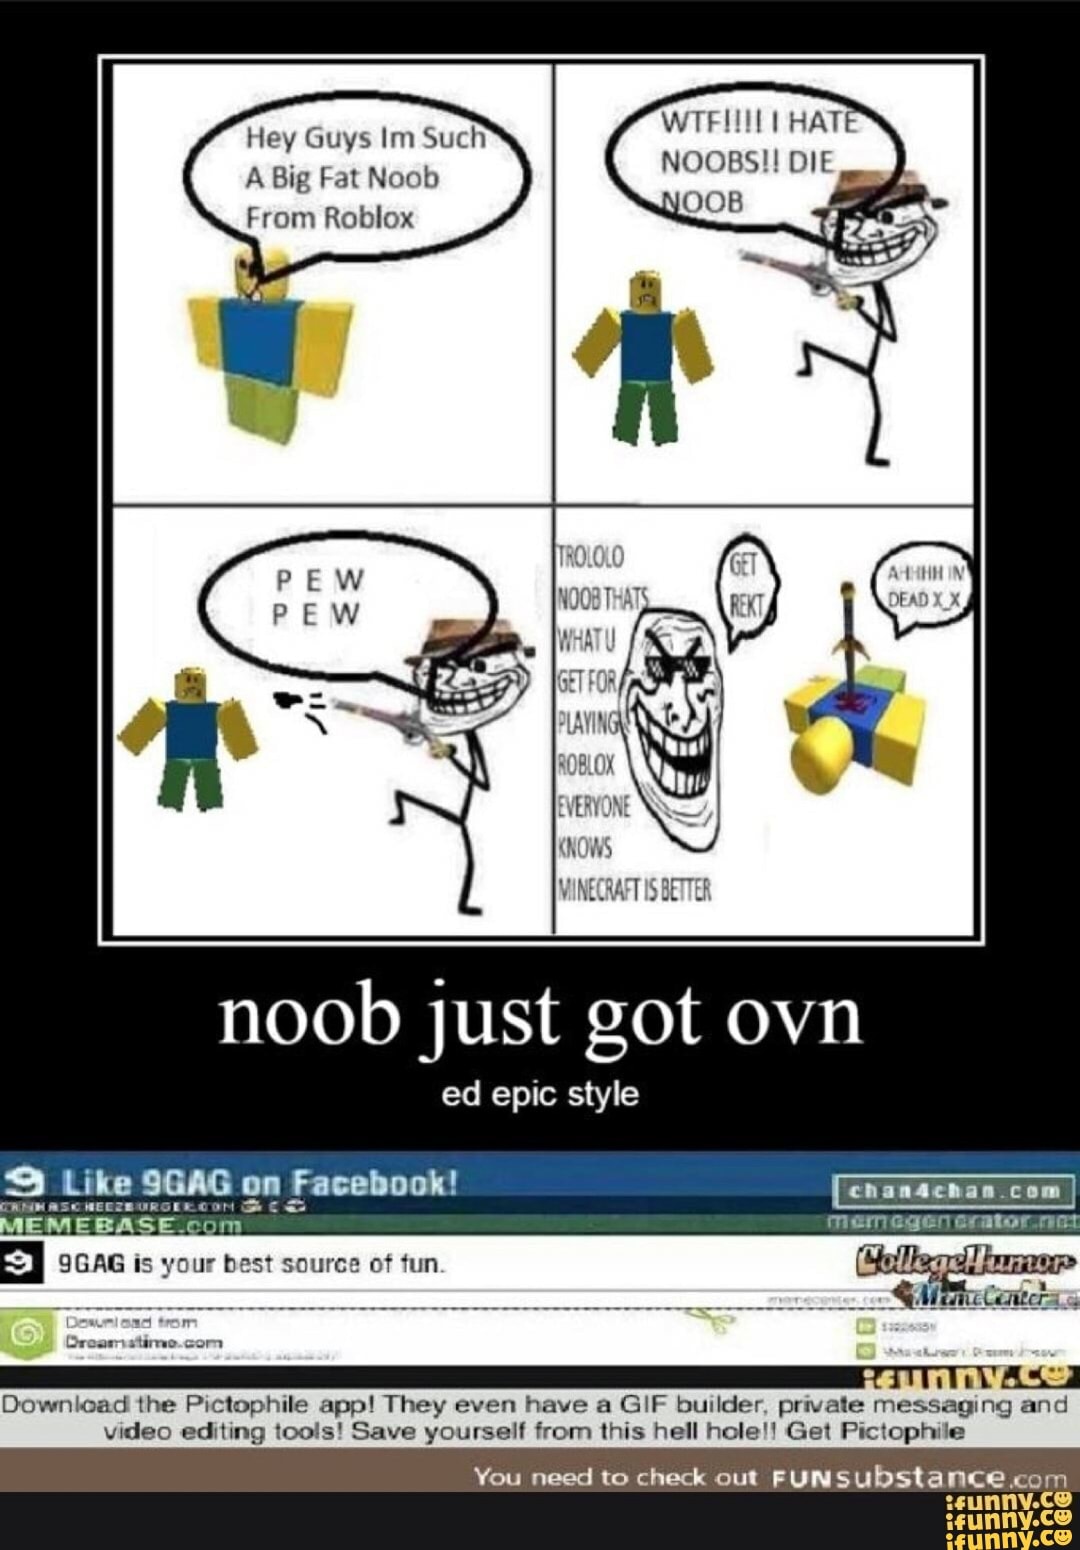 Hey Guys Im Such A Big Fat Noob From Roblox Noob Just Got Ovn I N Mi Download The Plclophile App They Even Have A Gif Bwlder Pnvale Messaging And Wdeo Editing - epic noob roblox